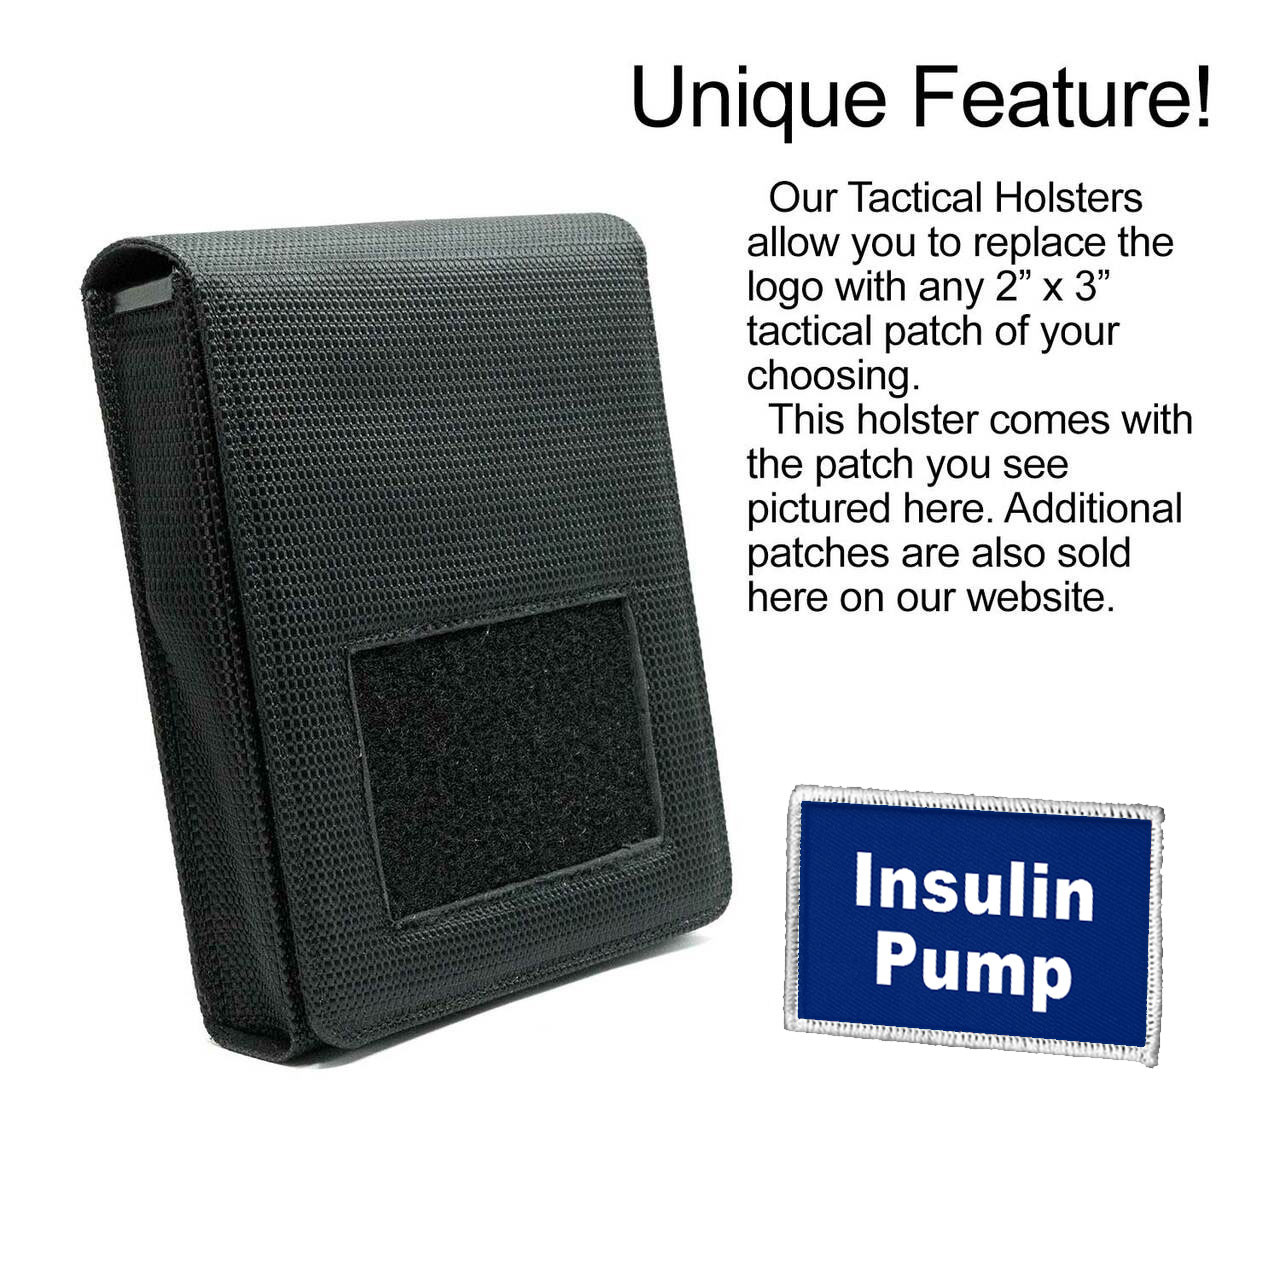 Insulin Pump Tactical Holster for the Glock 22